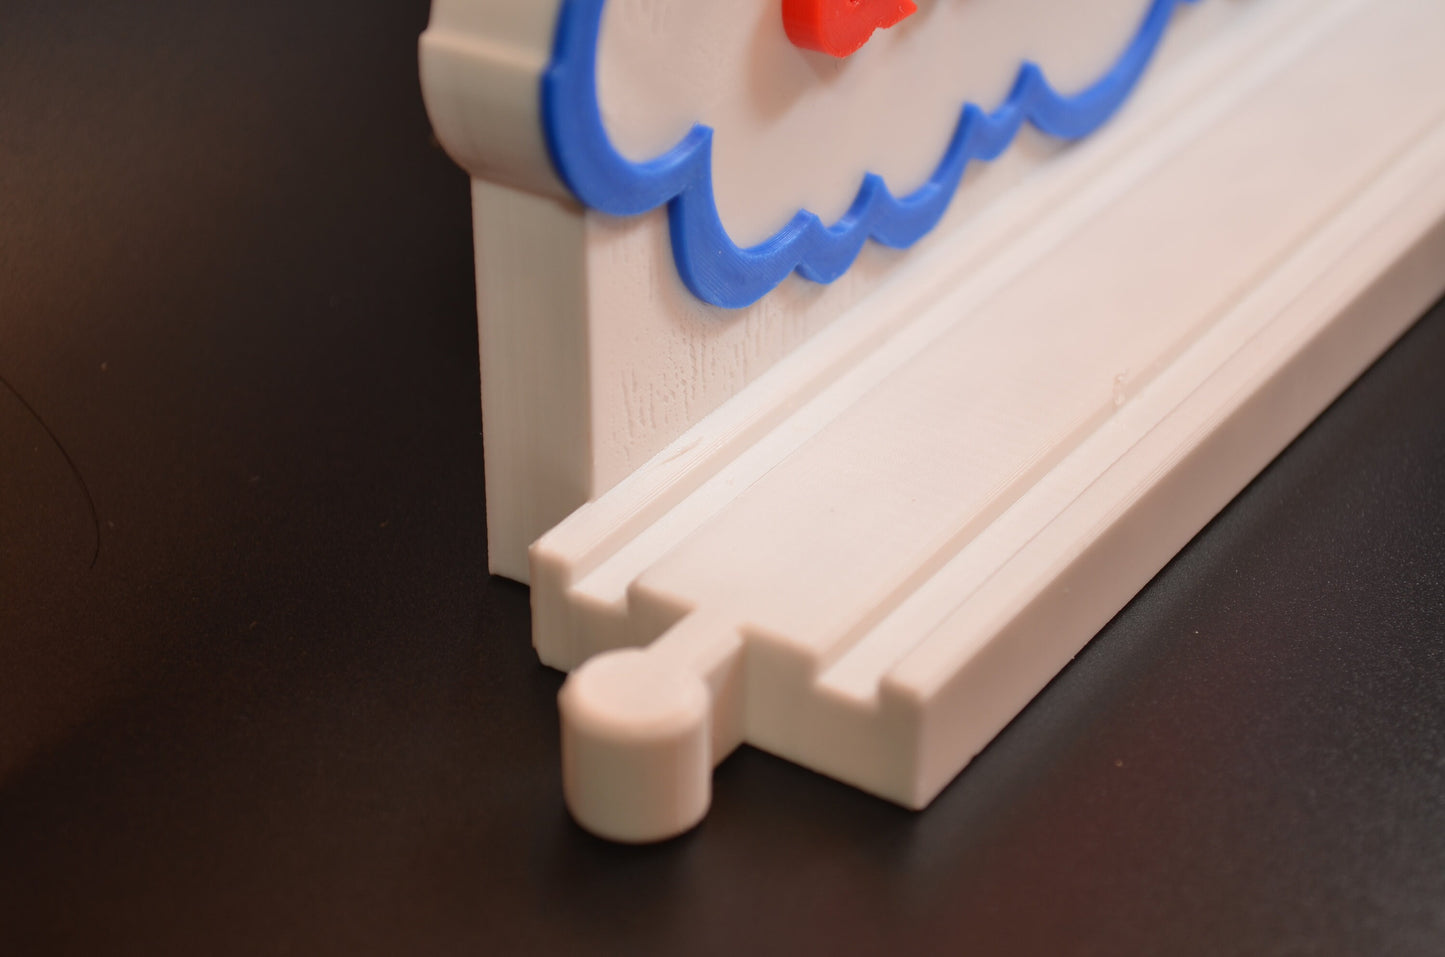 Thomas & Friends-Inspired Personalized Custom 3D-Printed Name Sign